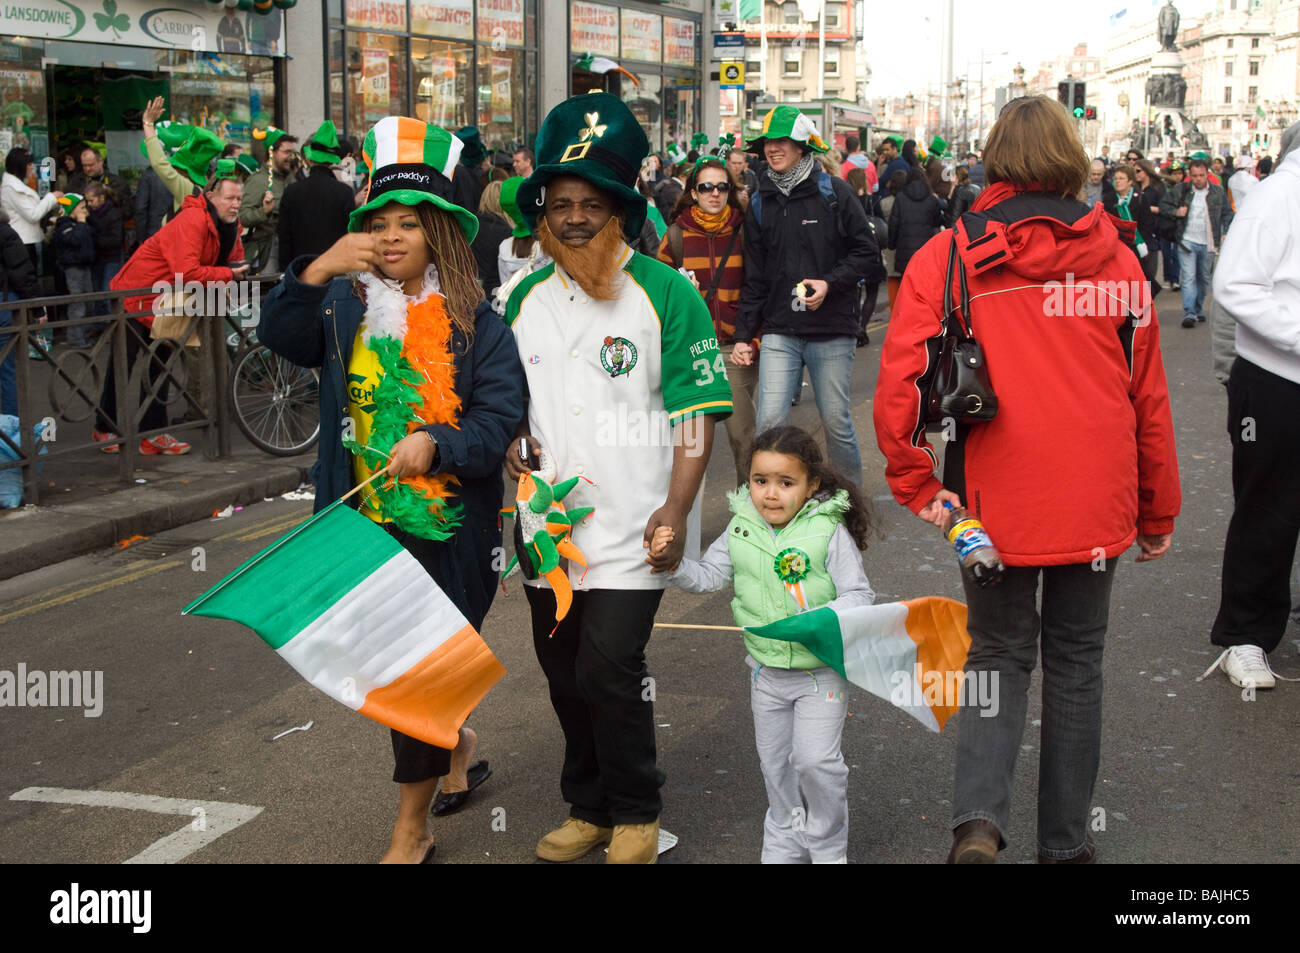 Family on the move with crowds at St Parick's Day parade, Dublin, Ireland Stock Photo